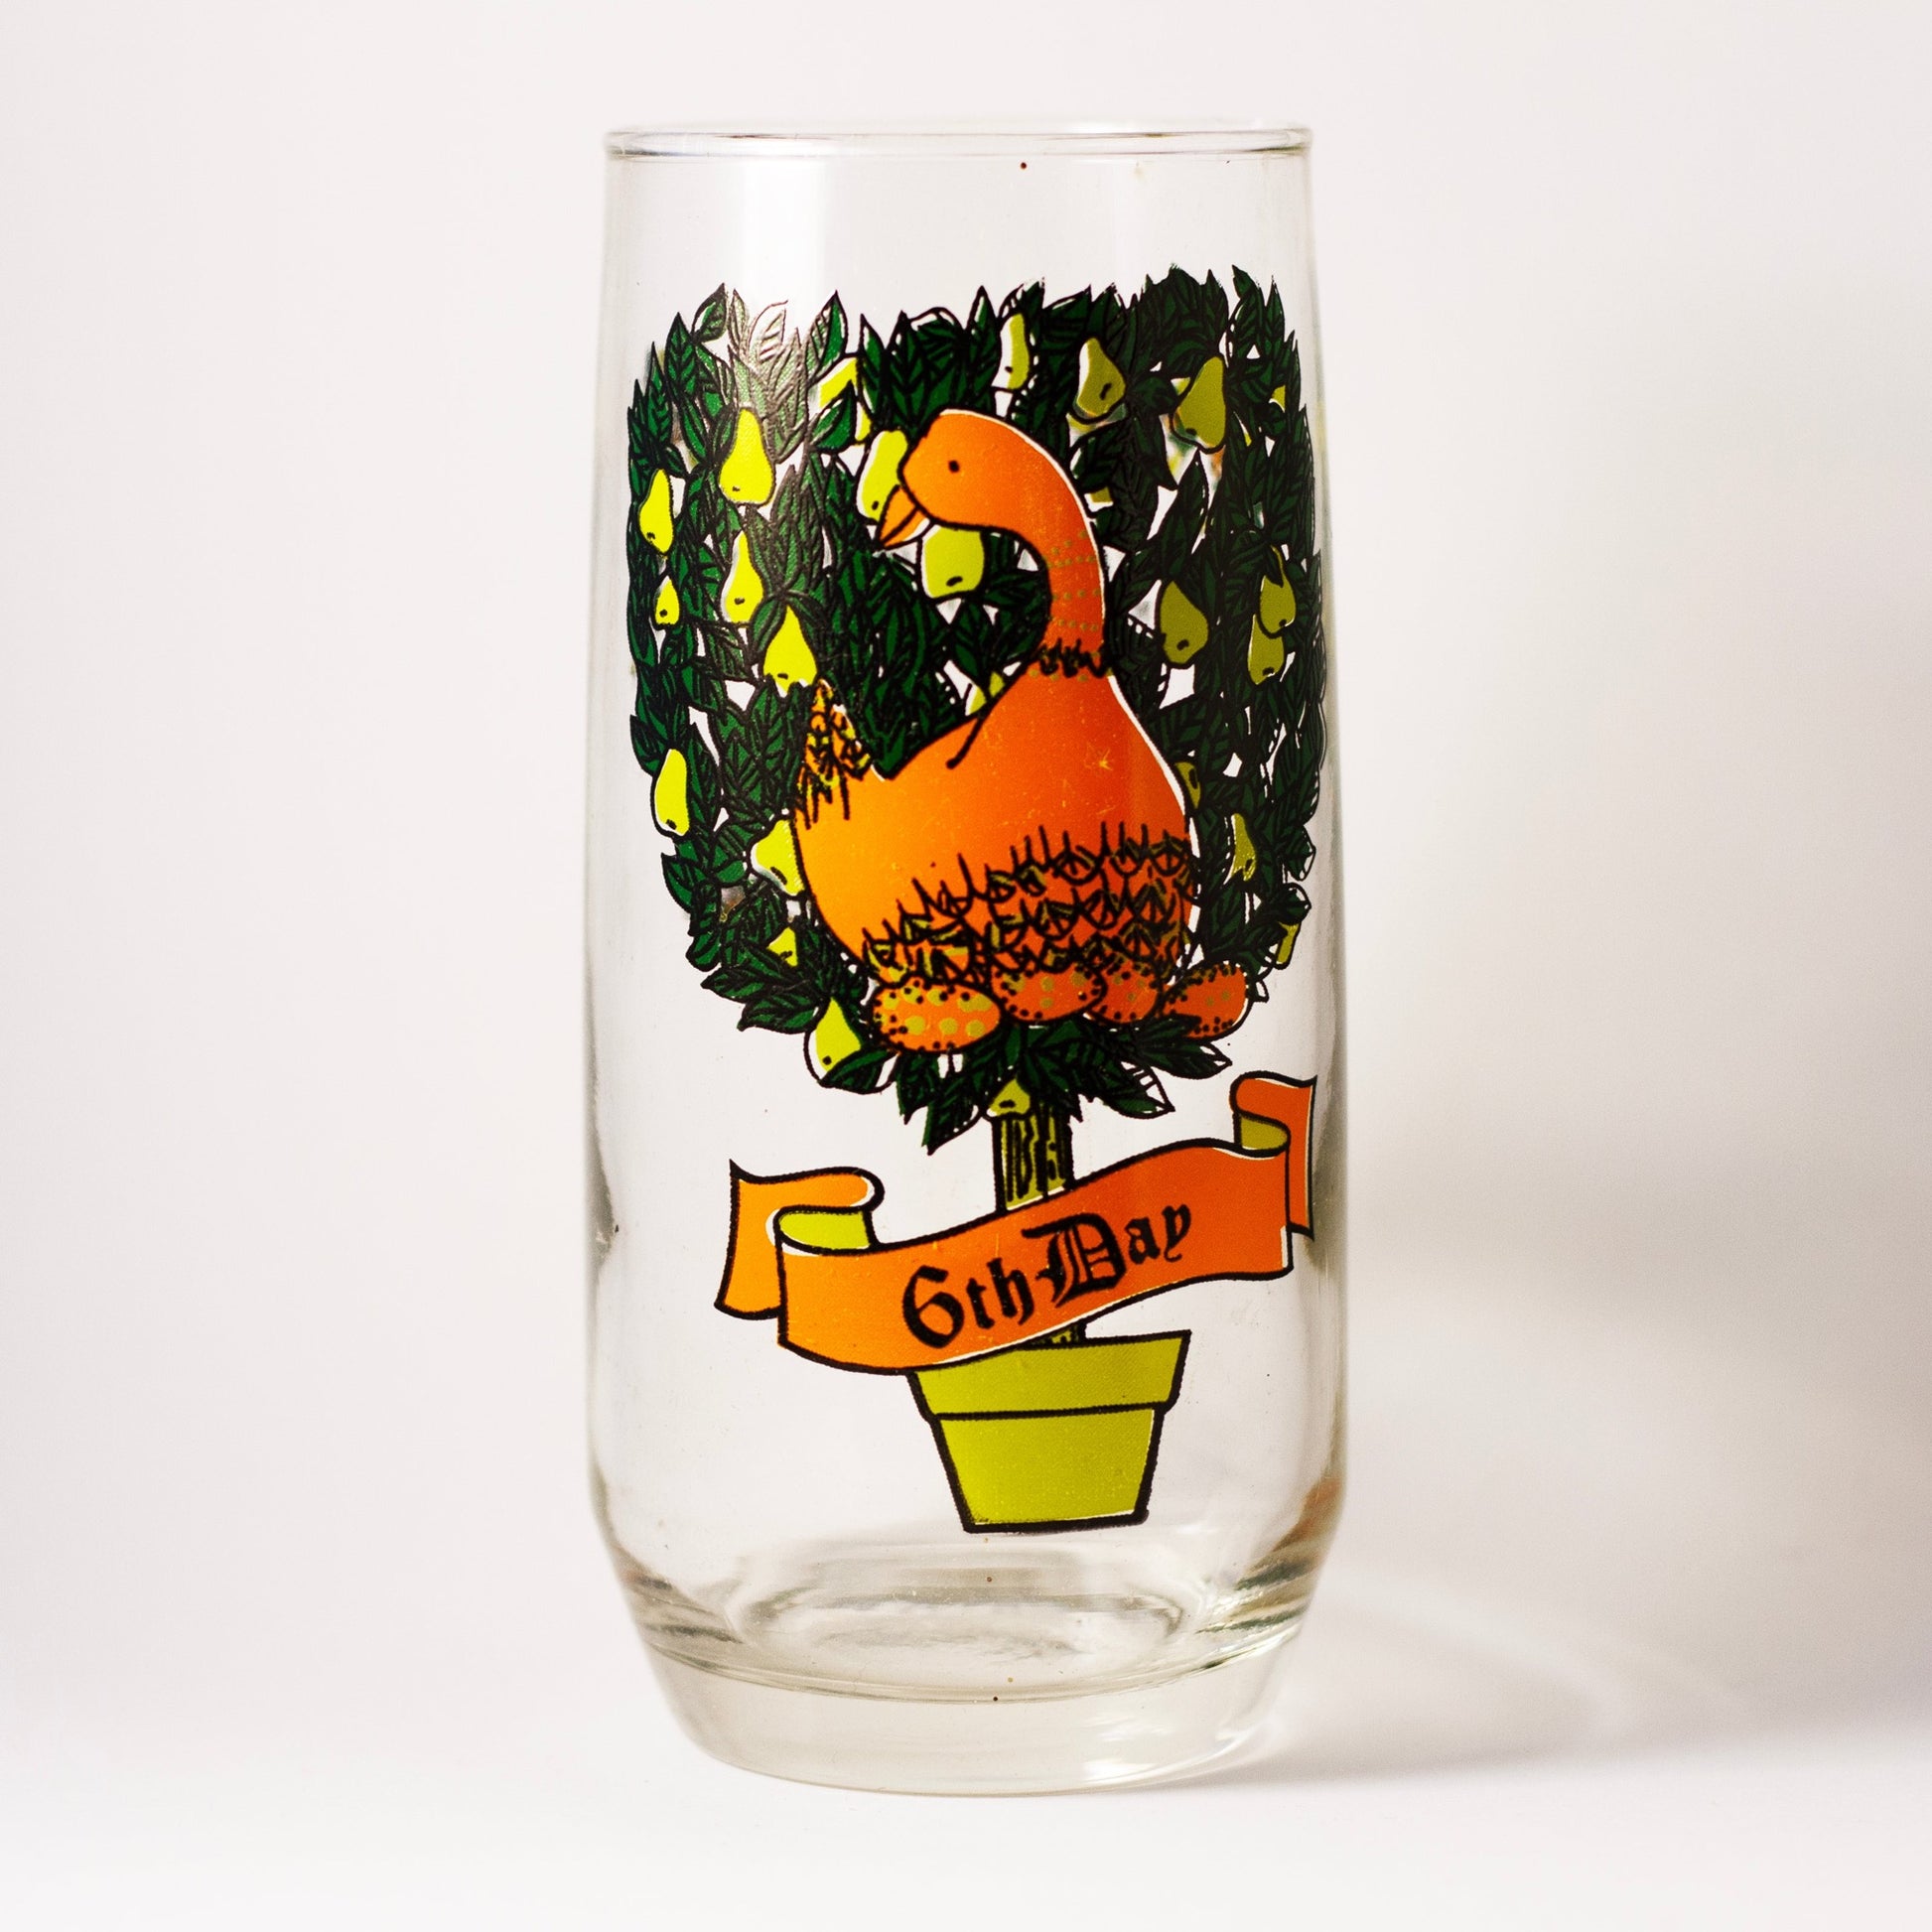 Whimsical 6th Day of the TWELVE DAYS OF CHRISTMAS Glass 